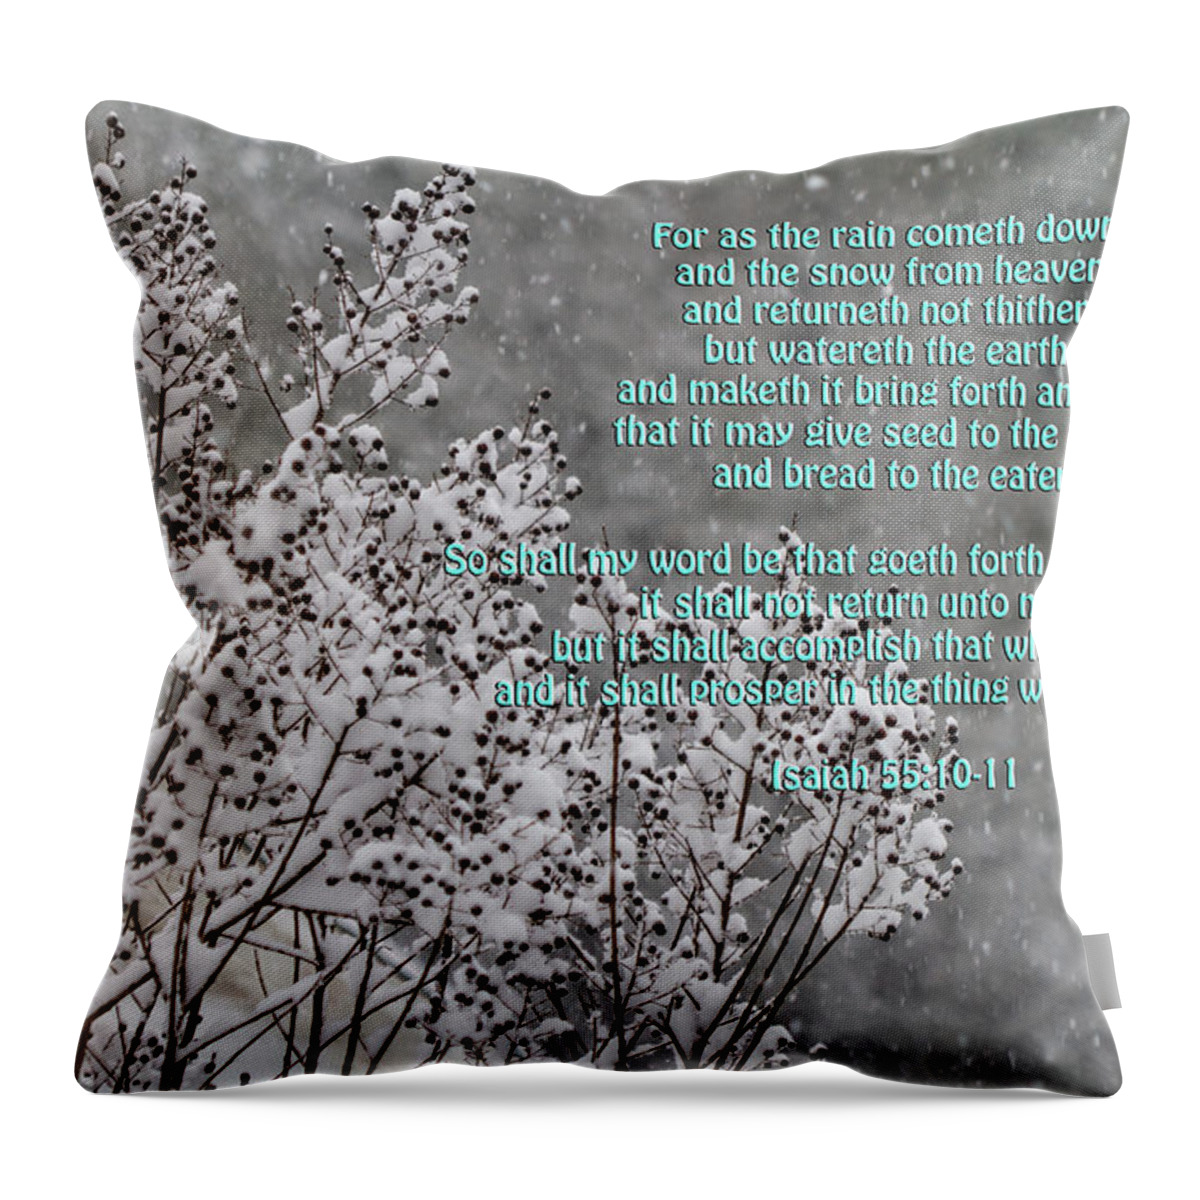 Snow Throw Pillow featuring the photograph The Snow From Heaven - Isaiah 55 by Kathy Clark